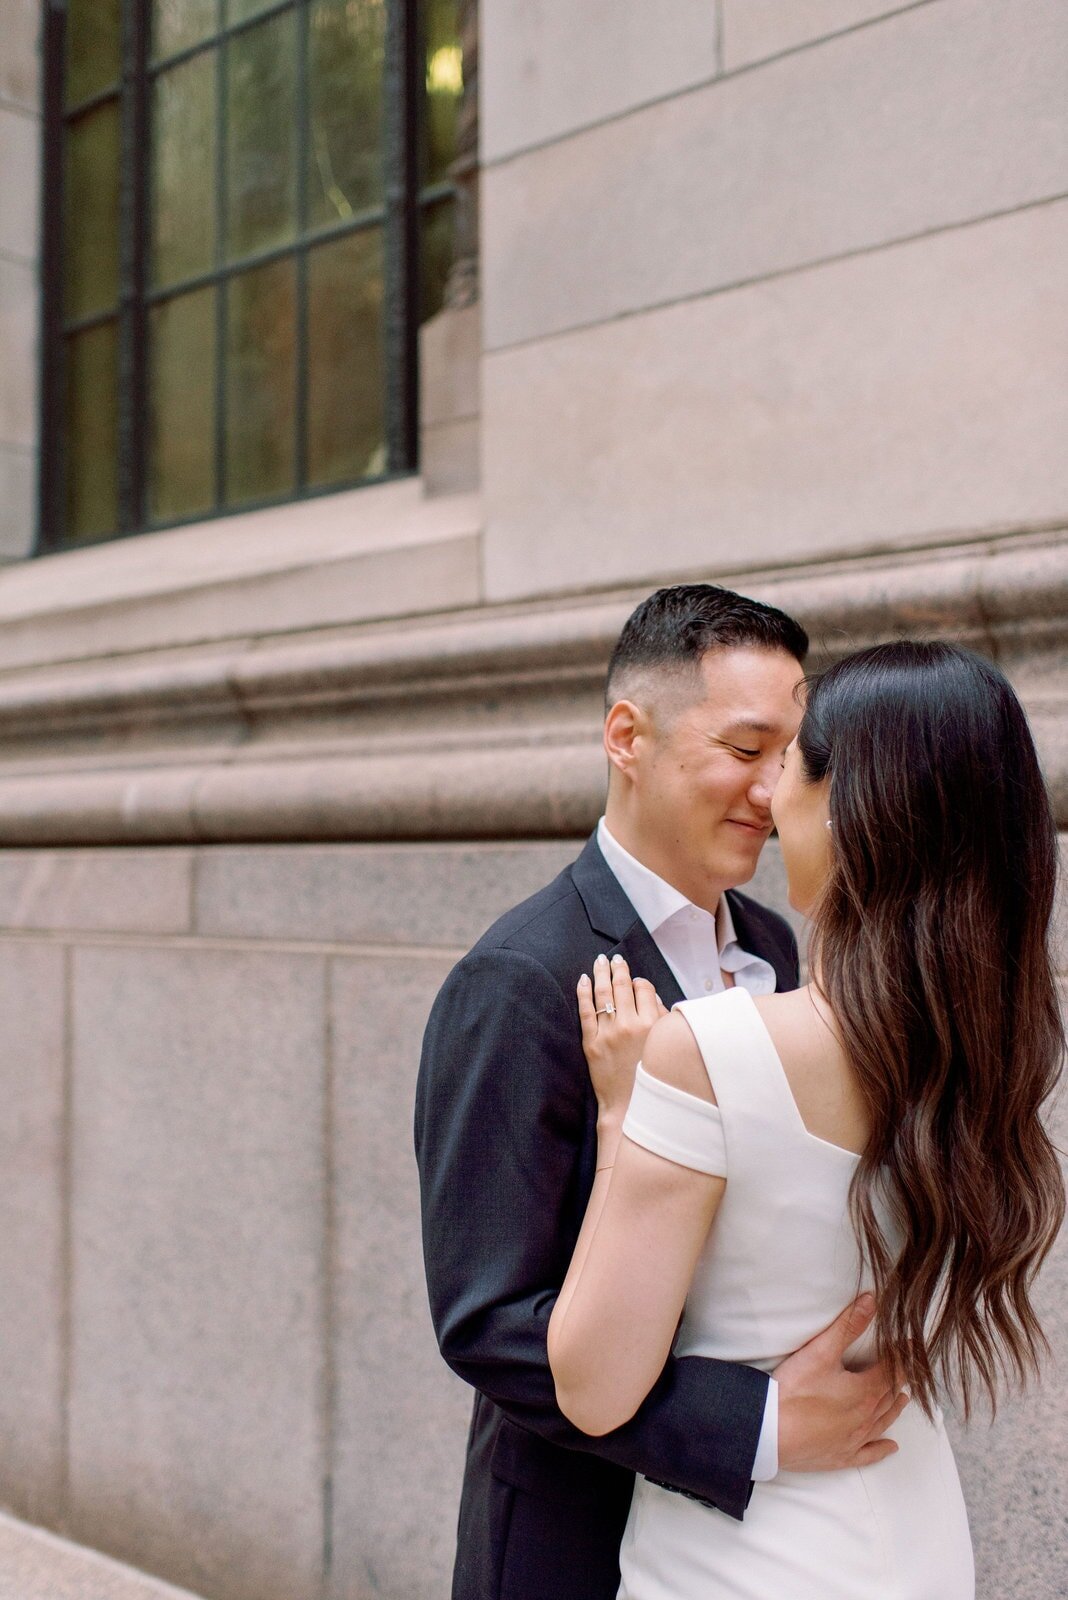 Modern Couple Embrace in Financial District Downtown Toronto Engagement Session Romantic Toronto Wedding Photographer Jacqueline James Photography